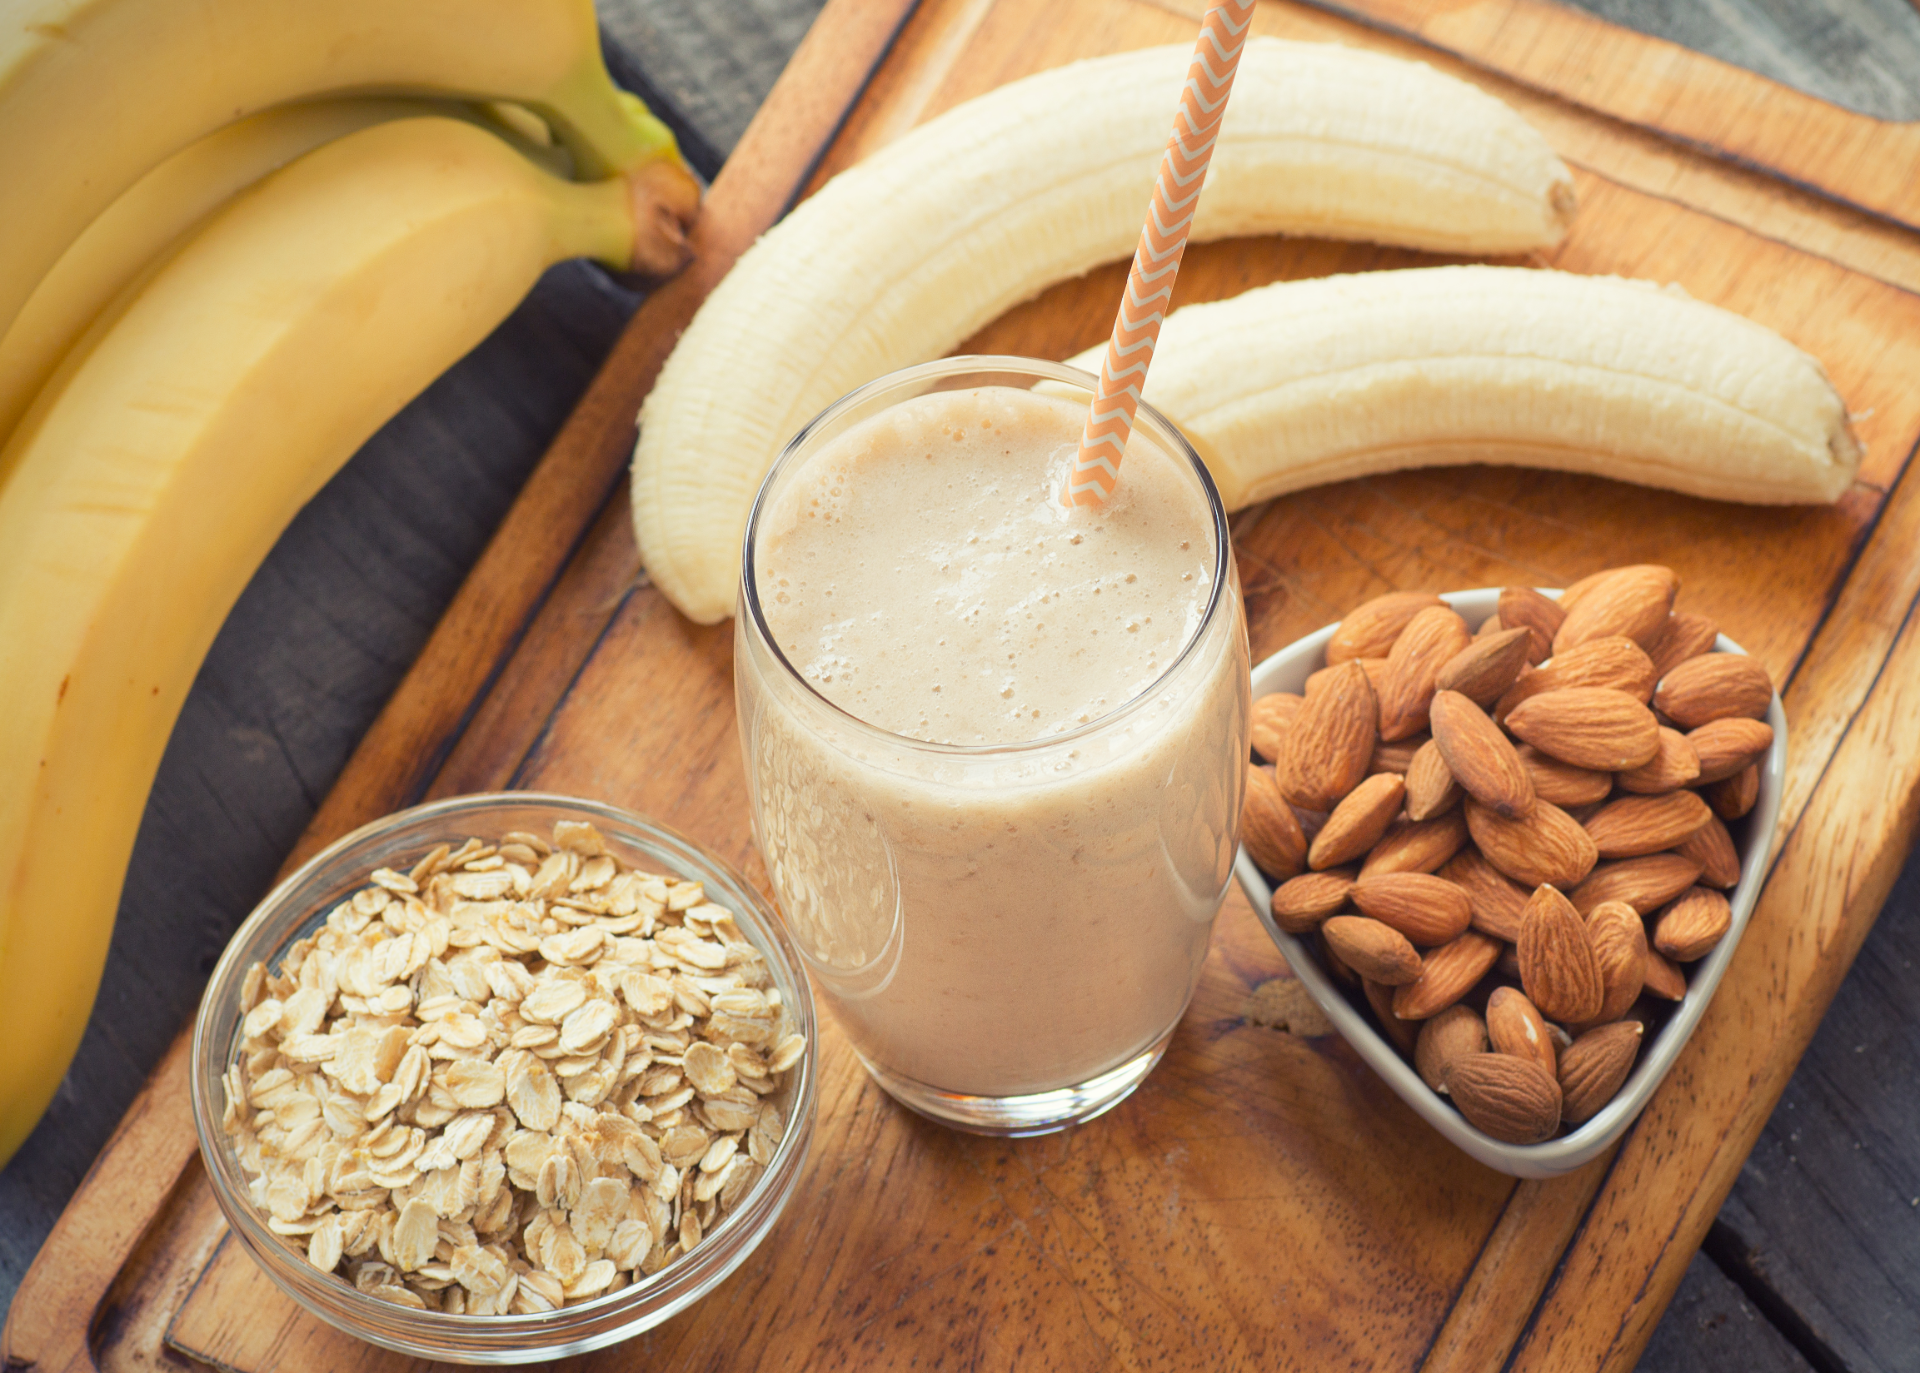 Smoothie in a glass with straw, sitting on a cutting board and surrounded by bananas, oats and almonds